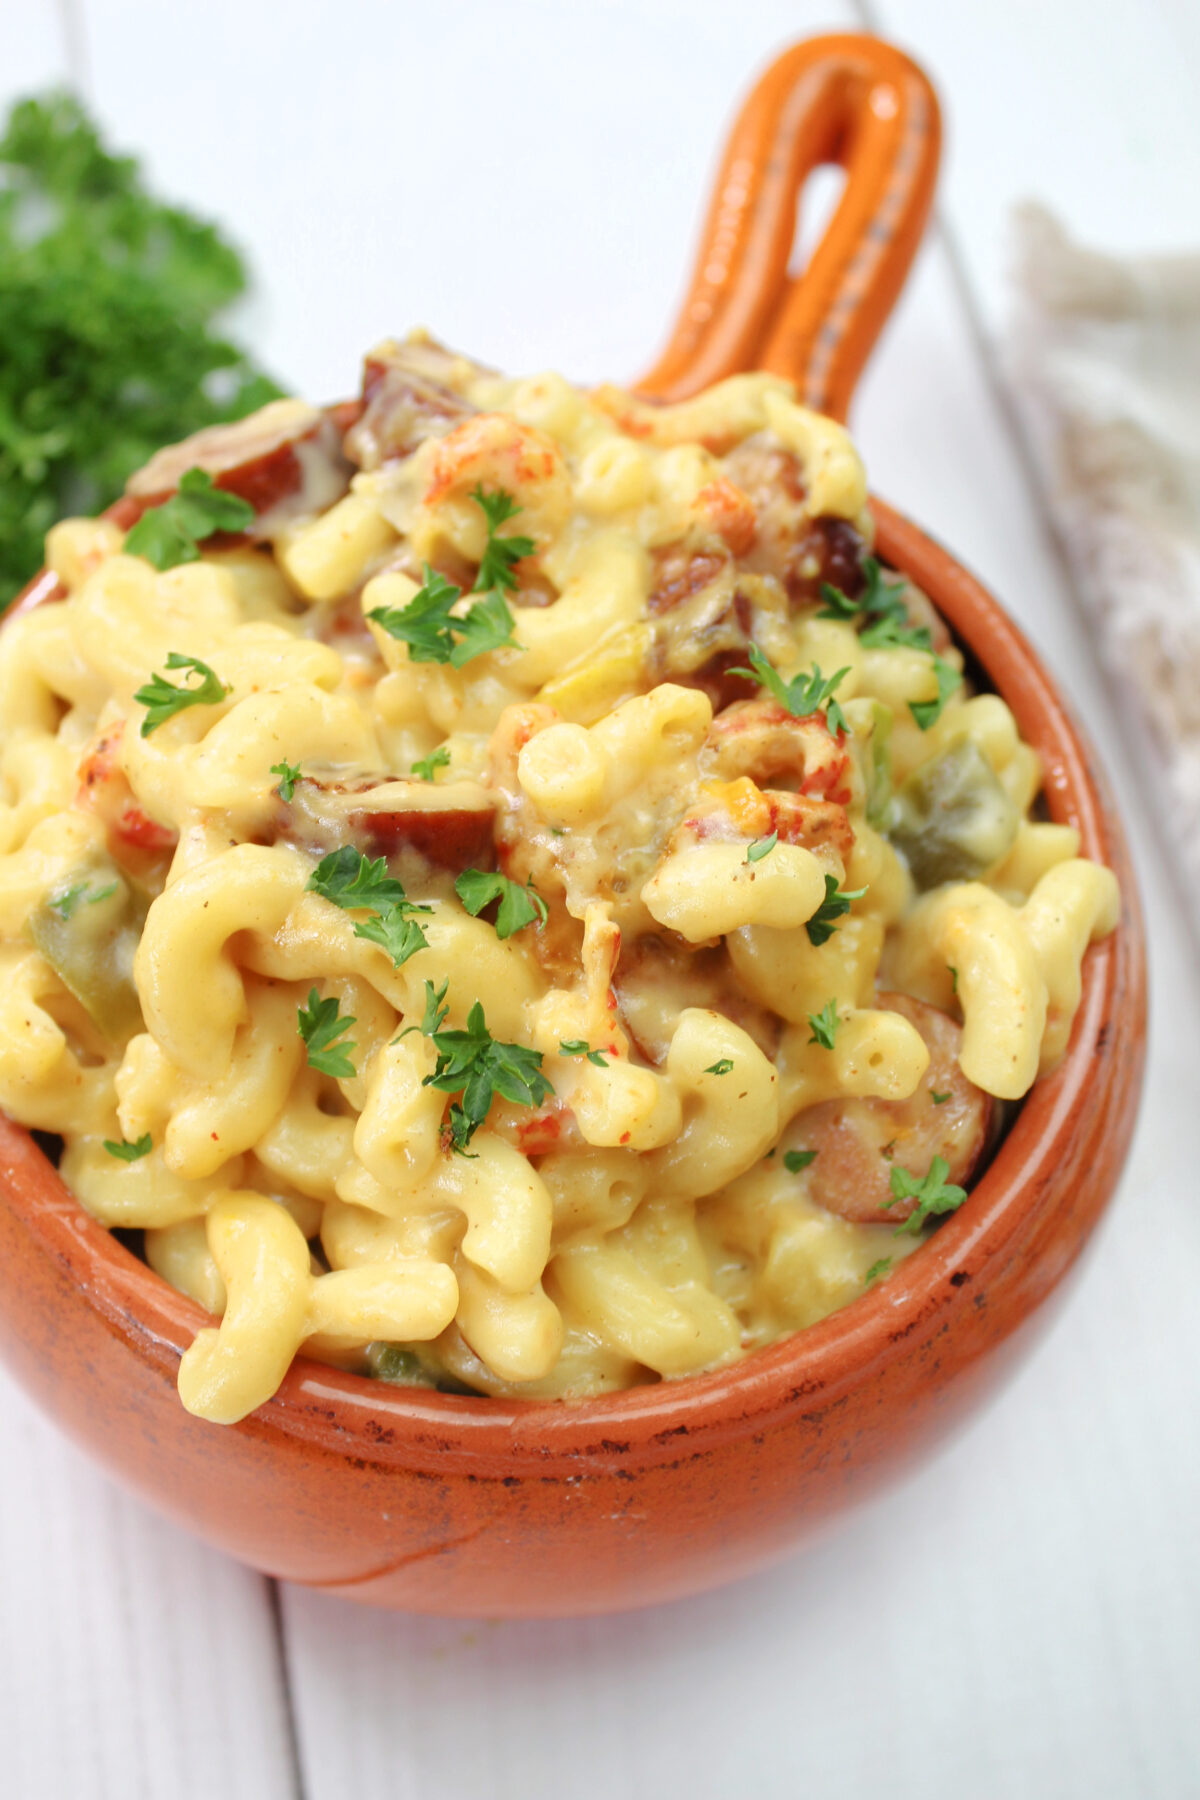 Add a twist to your mac and cheese game with our delicious Cajun Crawfish Mac & Cheese recipe. The perfect comfort food for any occasion!